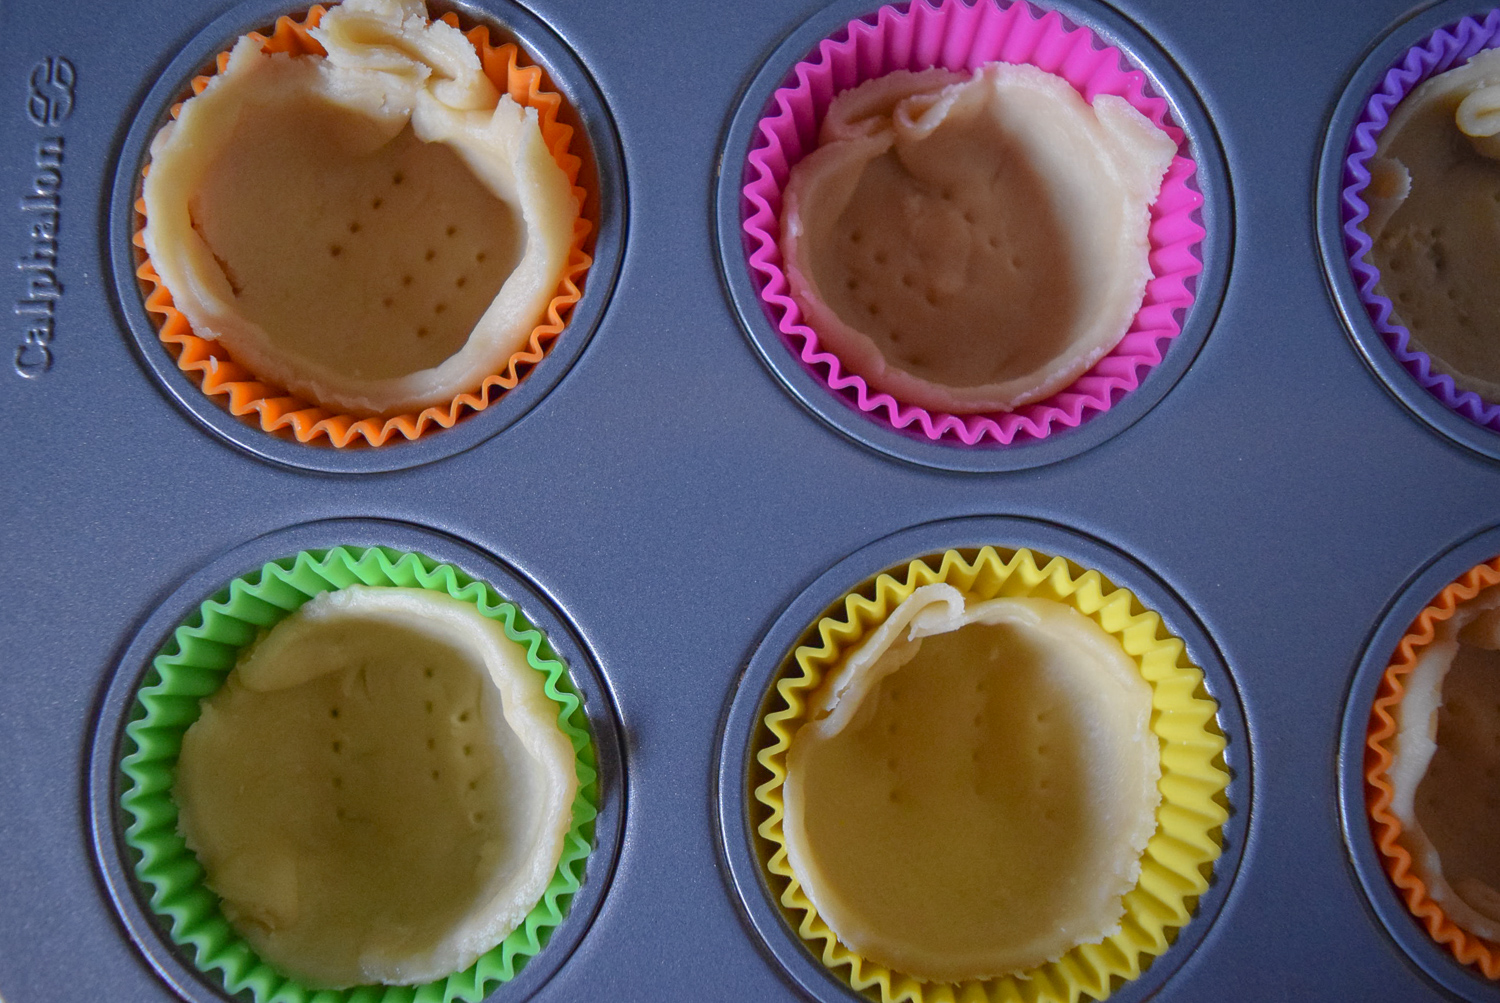 Pie crust in silicone baking cups before baking